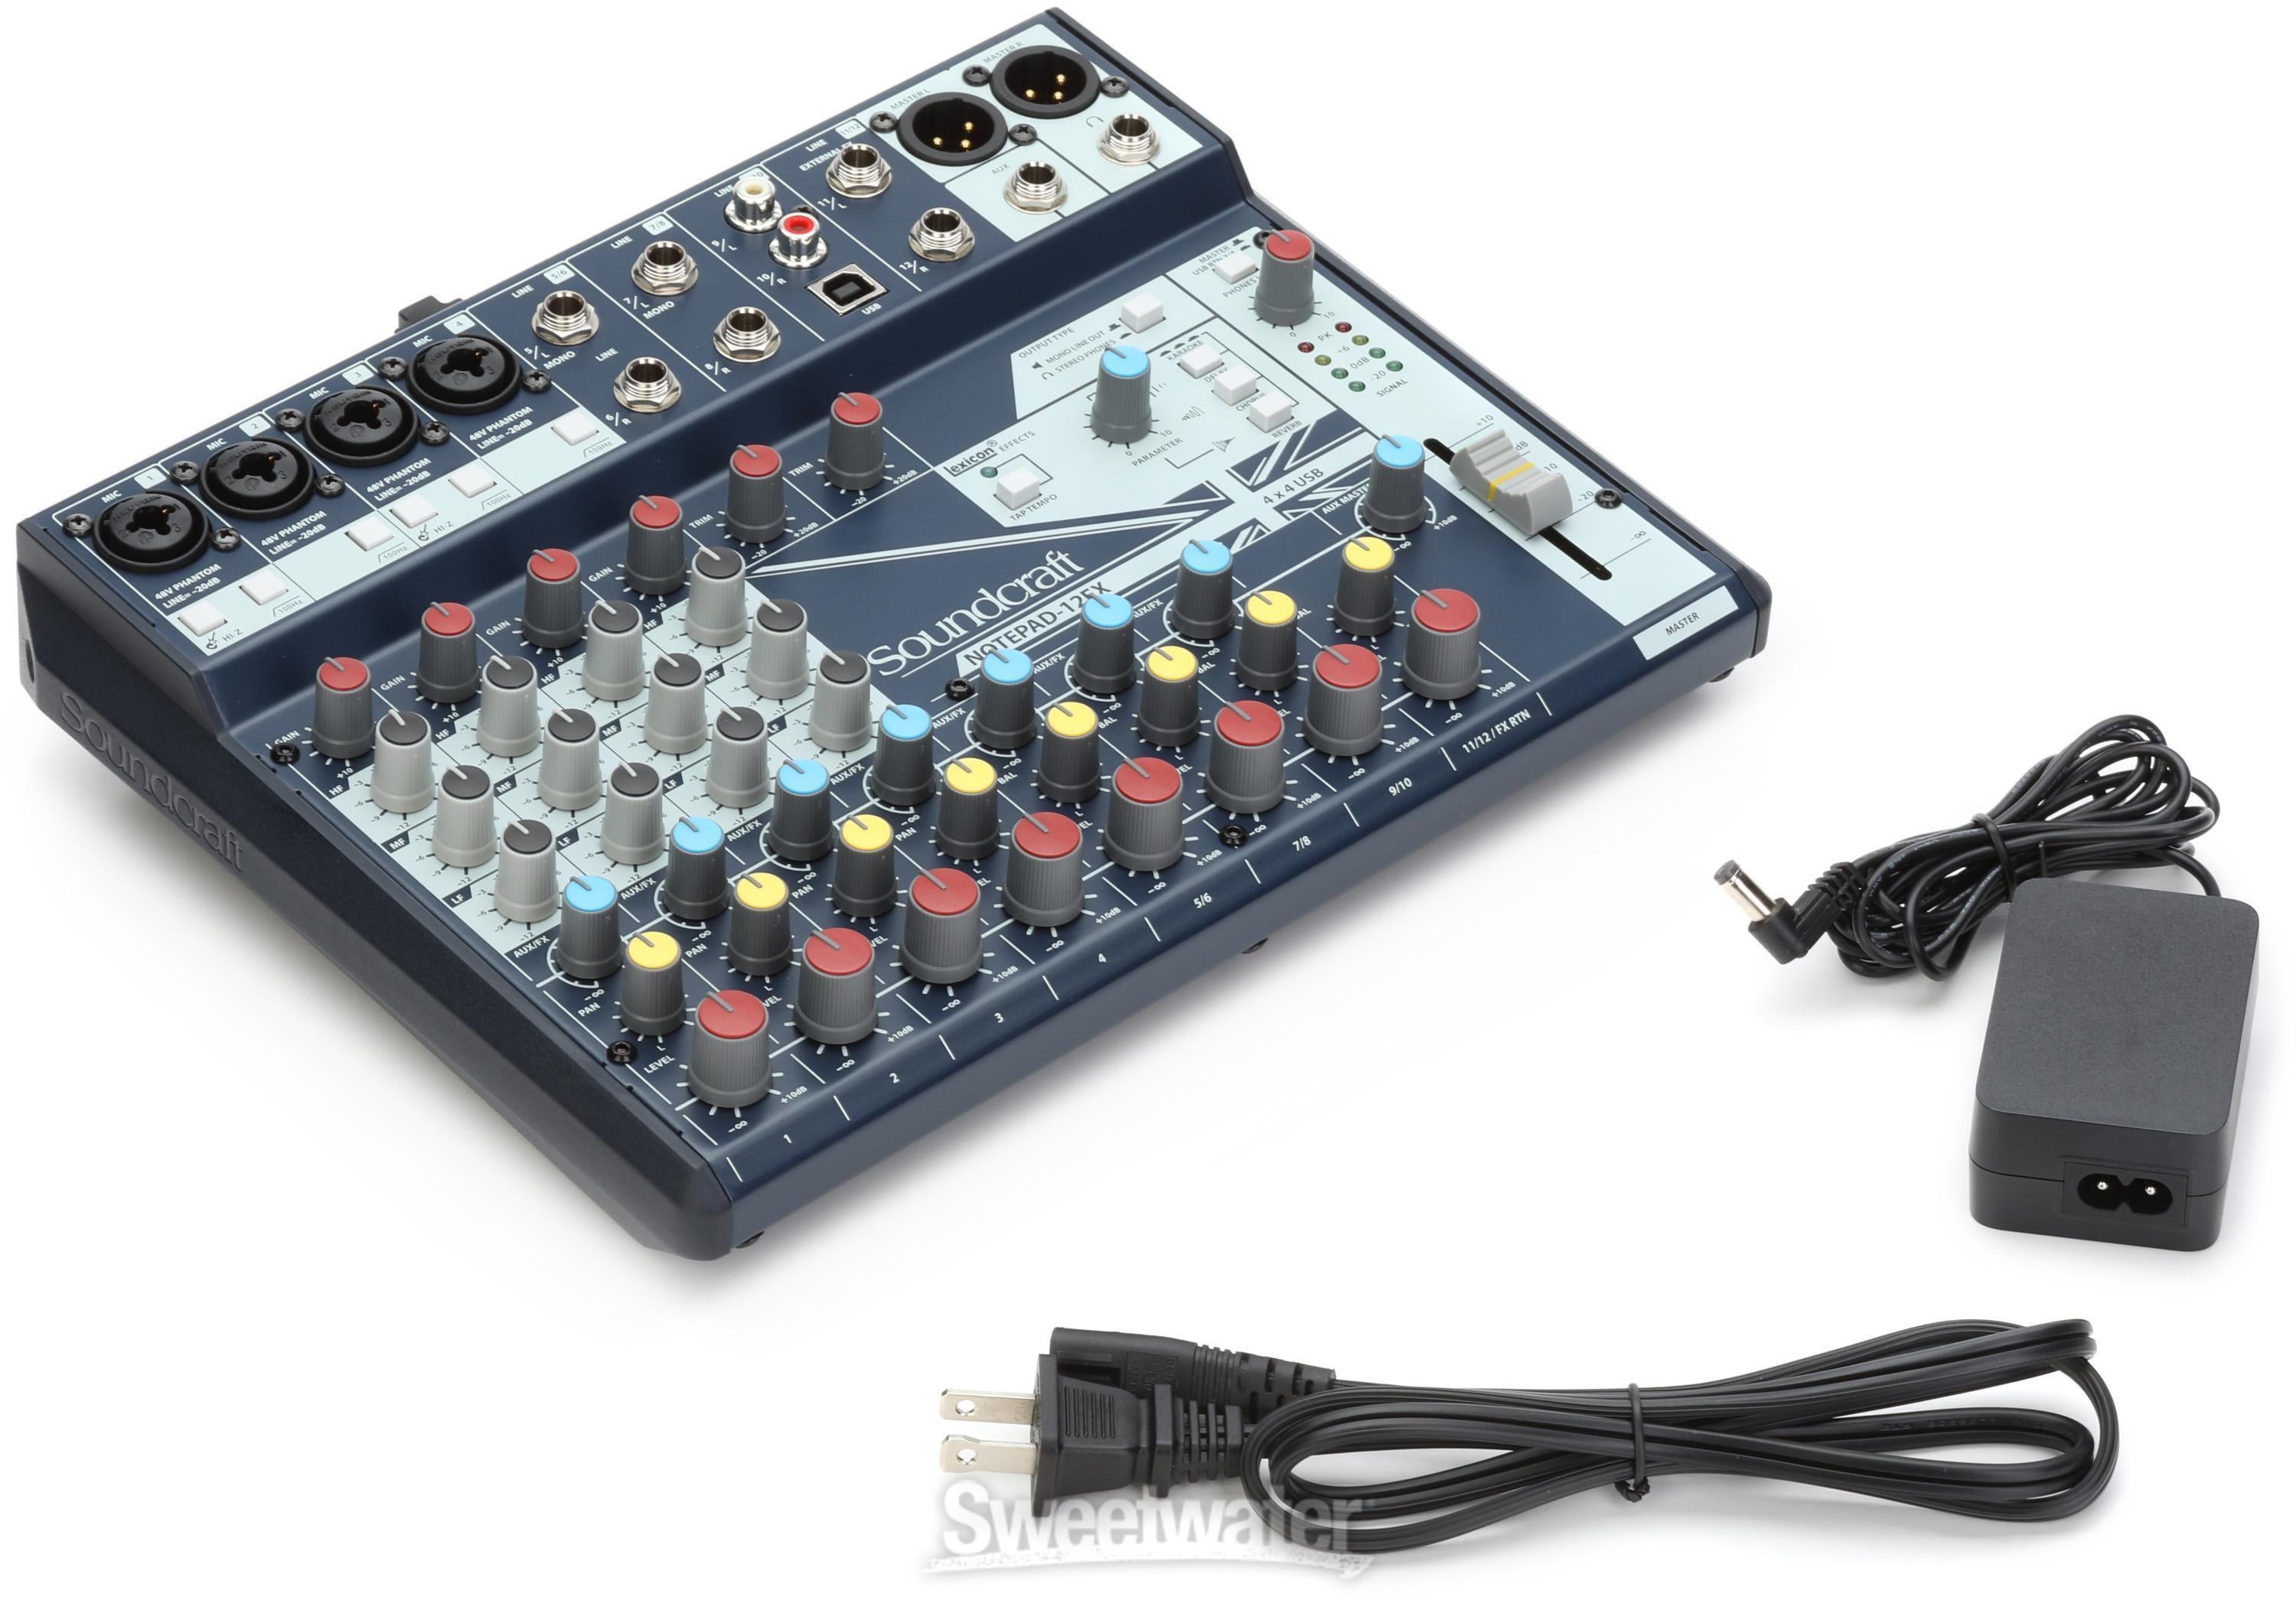 Mixer　USB　Soundcraft　and　Effects　Notepad-12FX　with　Sweetwater